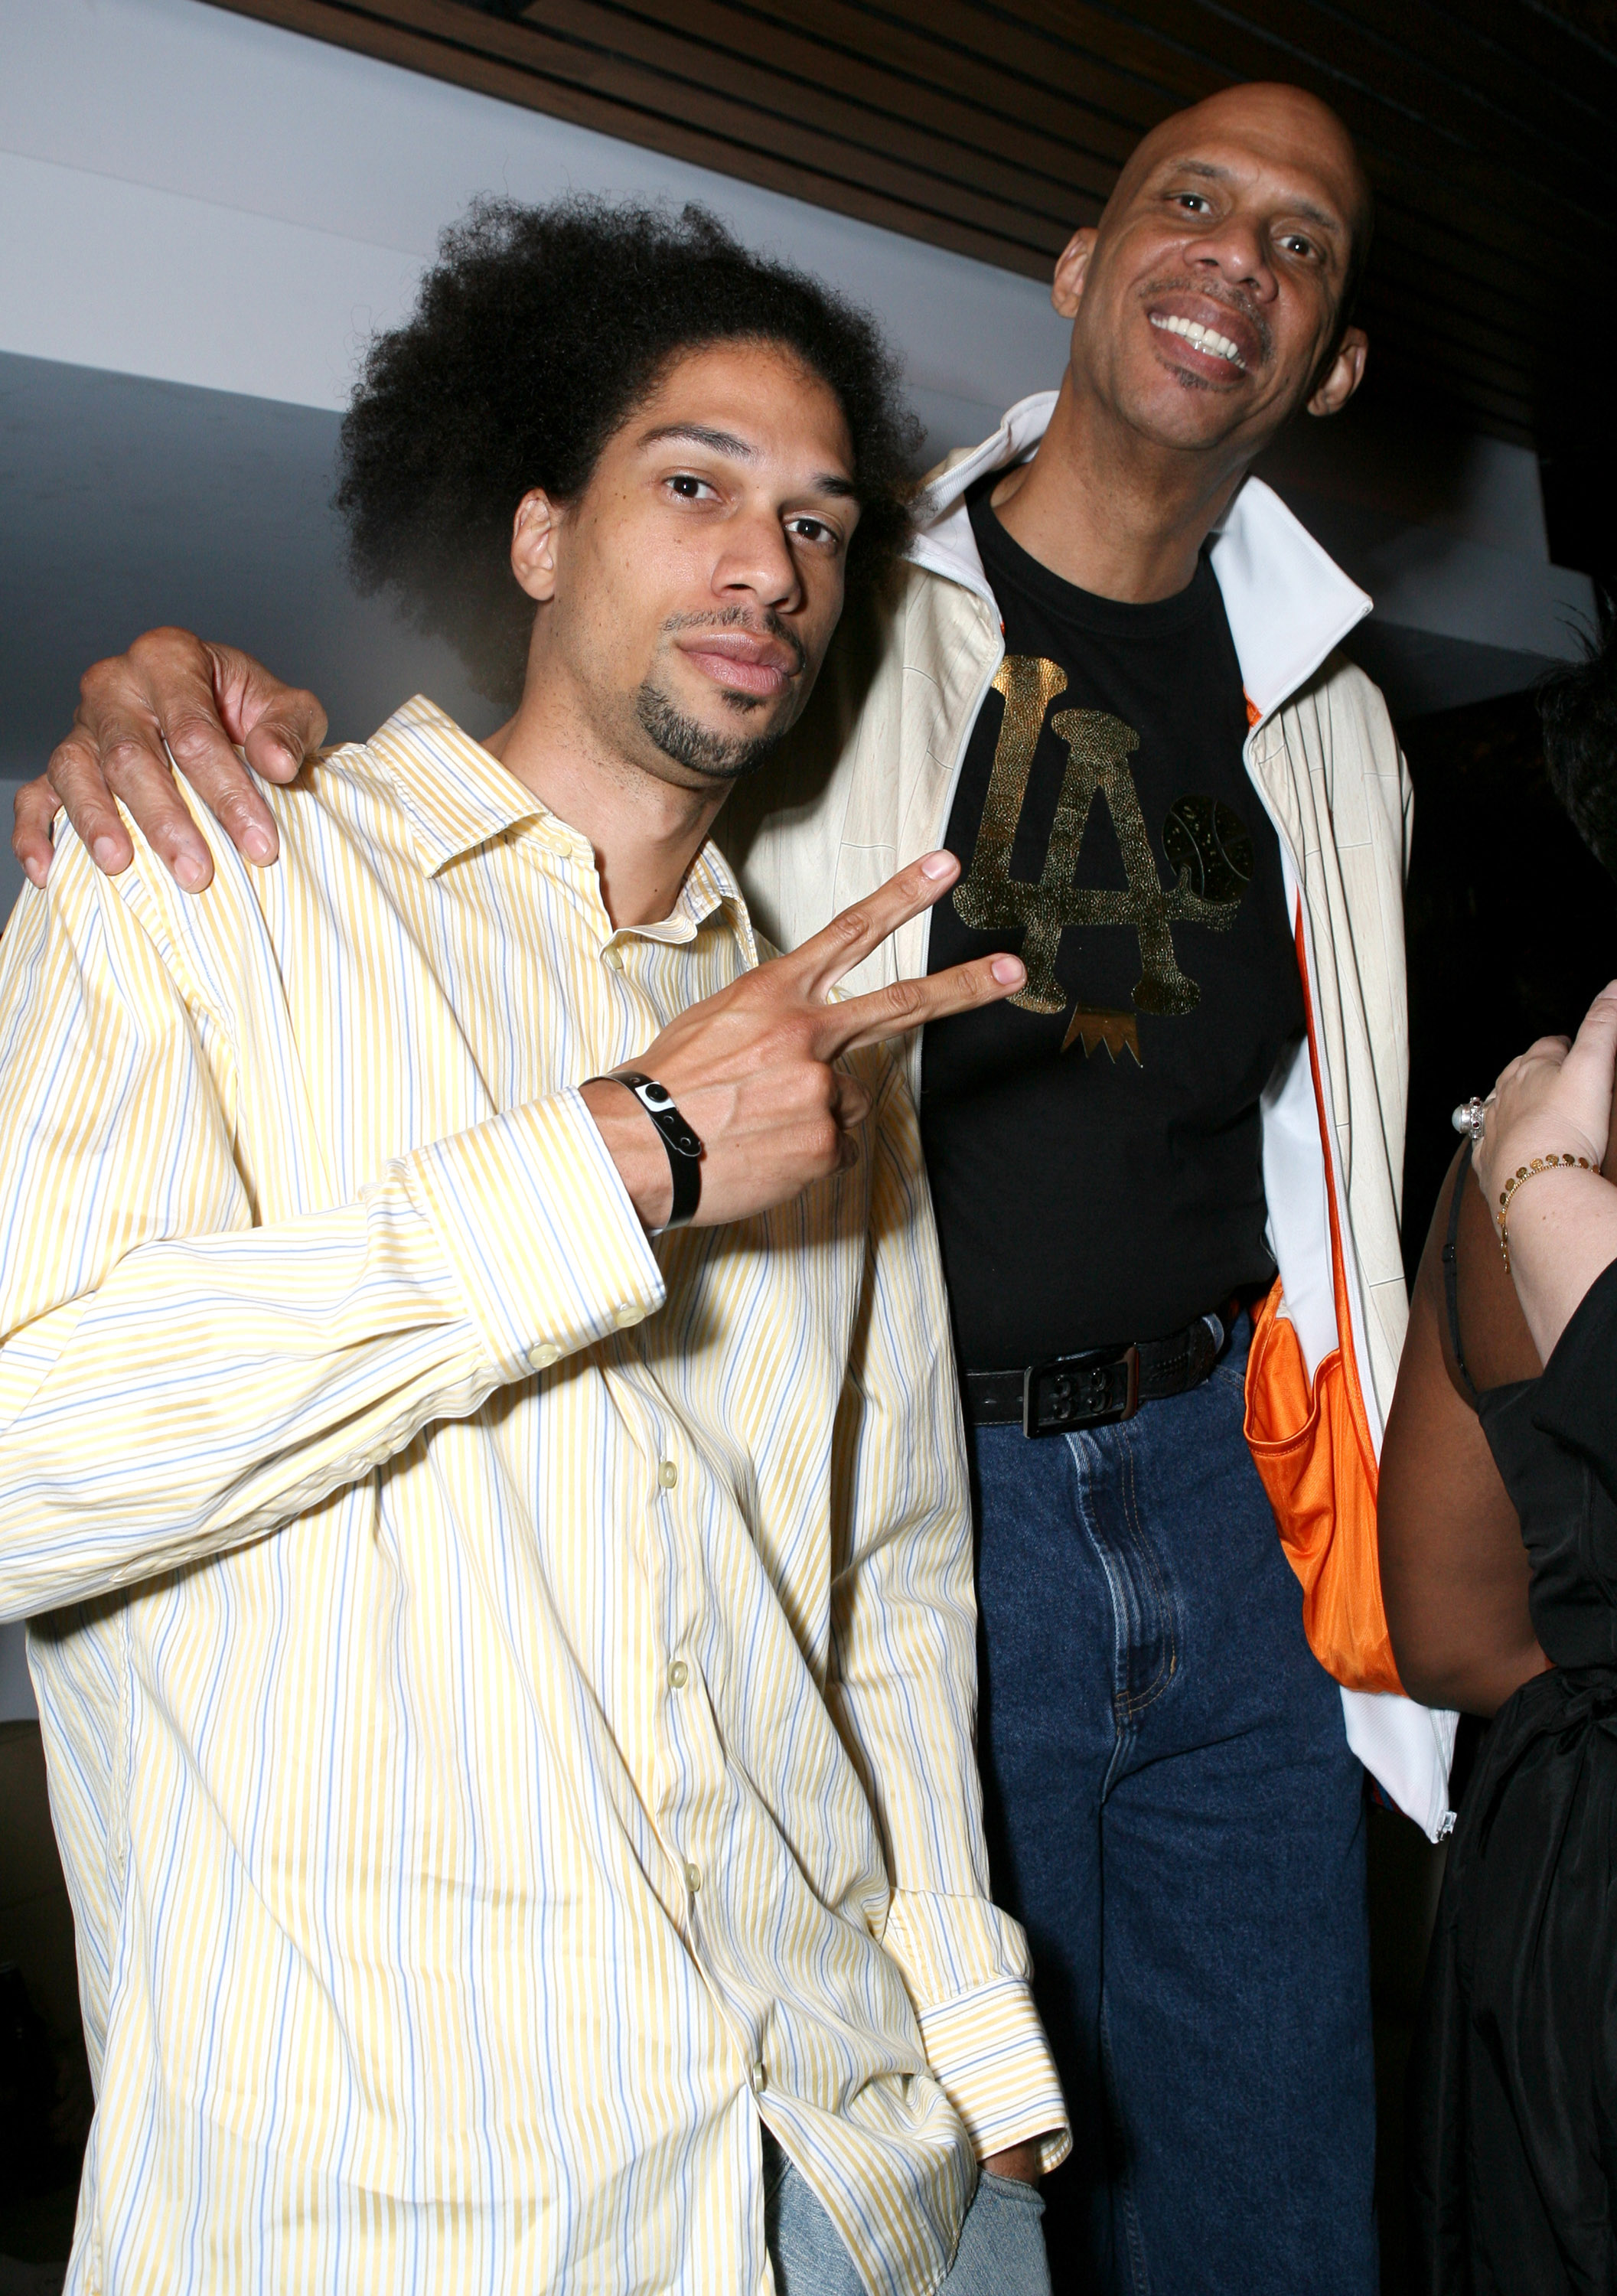 Kareem Jr. and Kareem Abdul-Jabar during Jay-Z's album release party for "Kingdom Come" on November 22, 2006, in Los Angeles, California. | Source: Getty Images